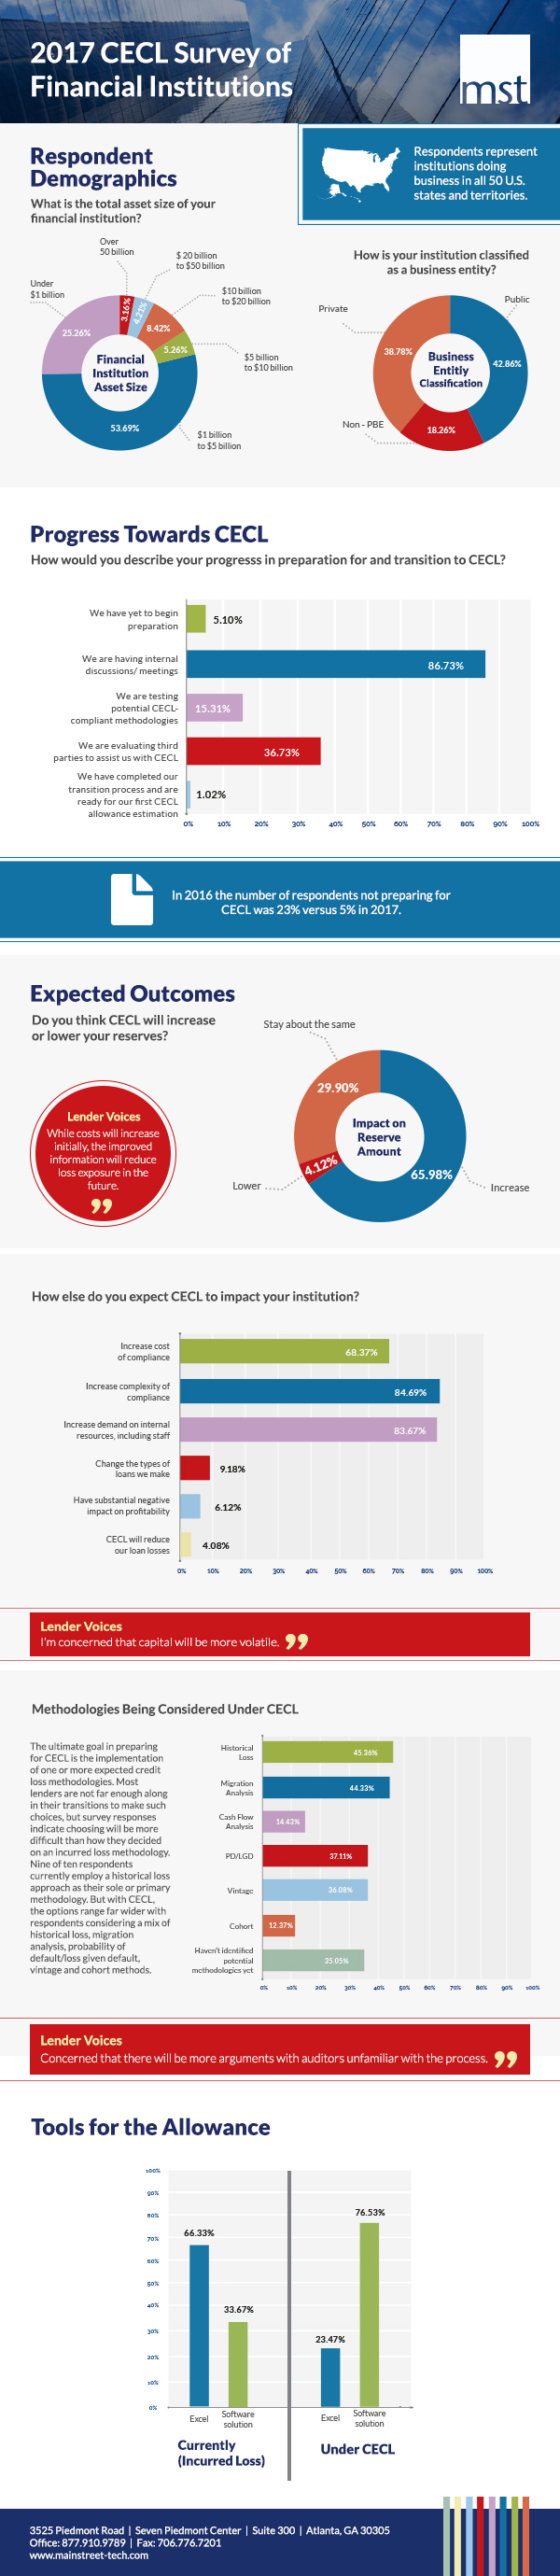 Infographic of MainStreet Technologies (MST) 2017 CECL Survey of Financial Institutions